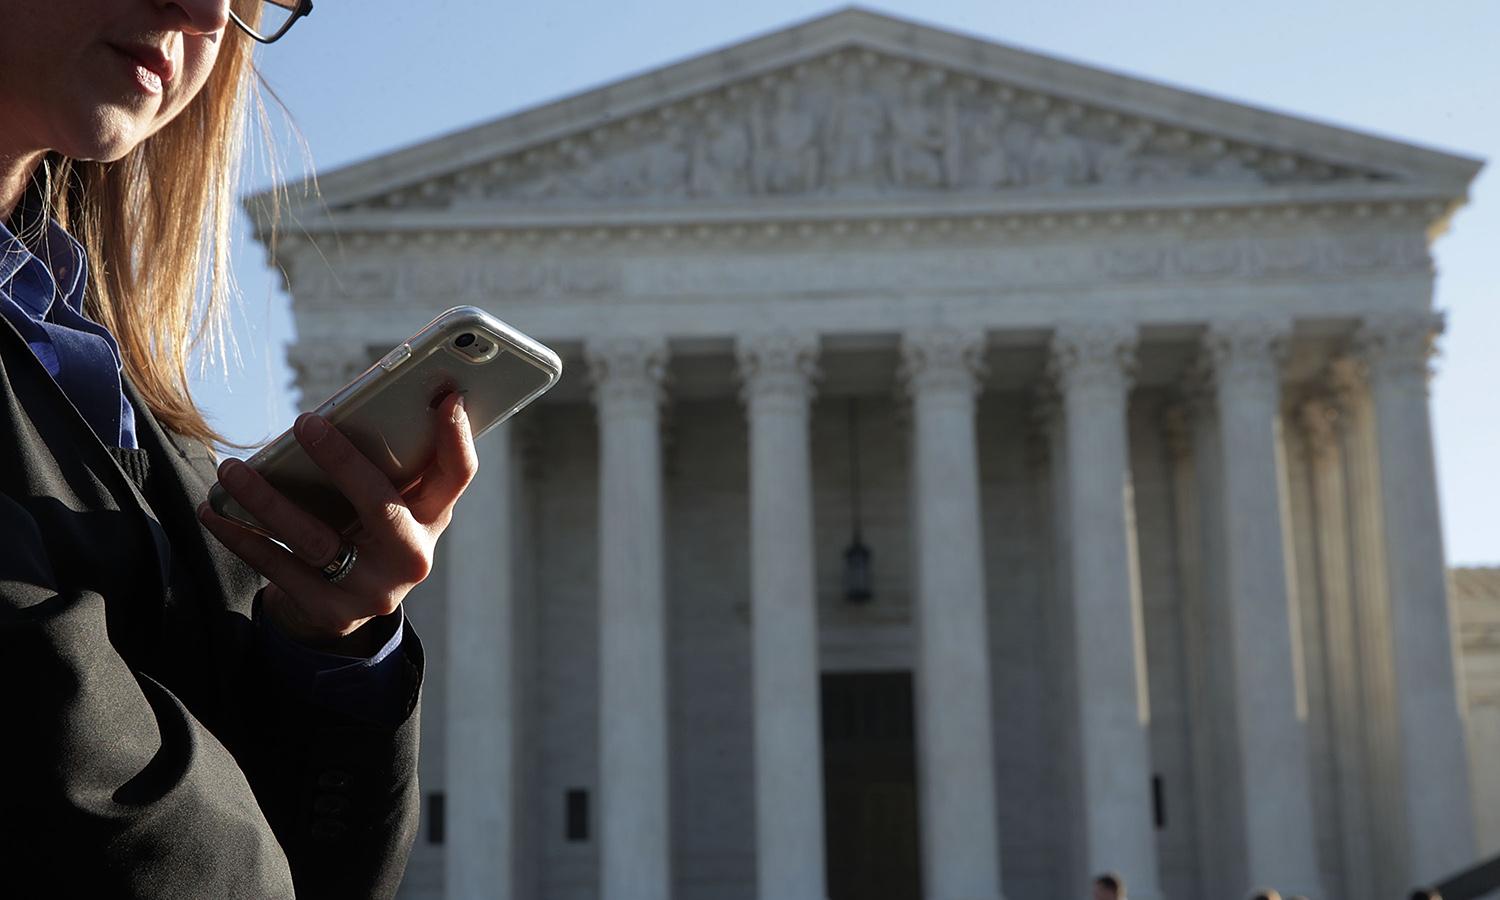 An FTC official wrote that the agency will &#8220;crack down&#8221; on companies misusing consumer data after the U.S. Supreme Court overturned Roe vs. Wade last month. Pictured: A woman checks her cell phone as she waits in line to enter the U.S. Supreme Court to view a hearing Nov. 29, 2017, in Washington. (Photo by Alex Wong/Getty Images)